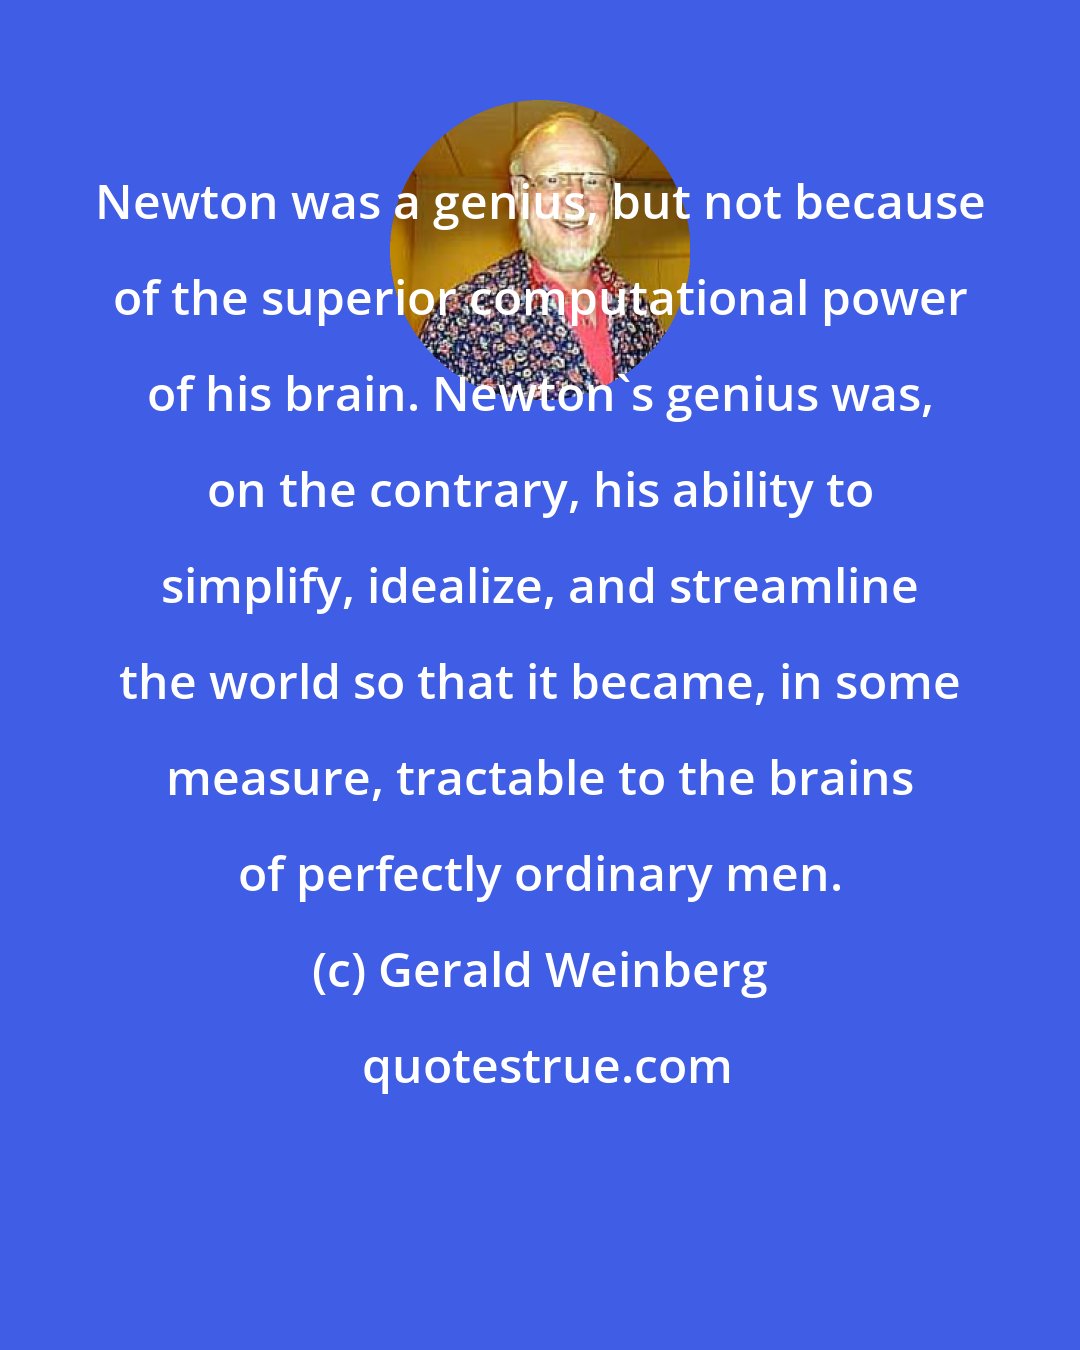 Gerald Weinberg: Newton was a genius, but not because of the superior computational power of his brain. Newton's genius was, on the contrary, his ability to simplify, idealize, and streamline the world so that it became, in some measure, tractable to the brains of perfectly ordinary men.